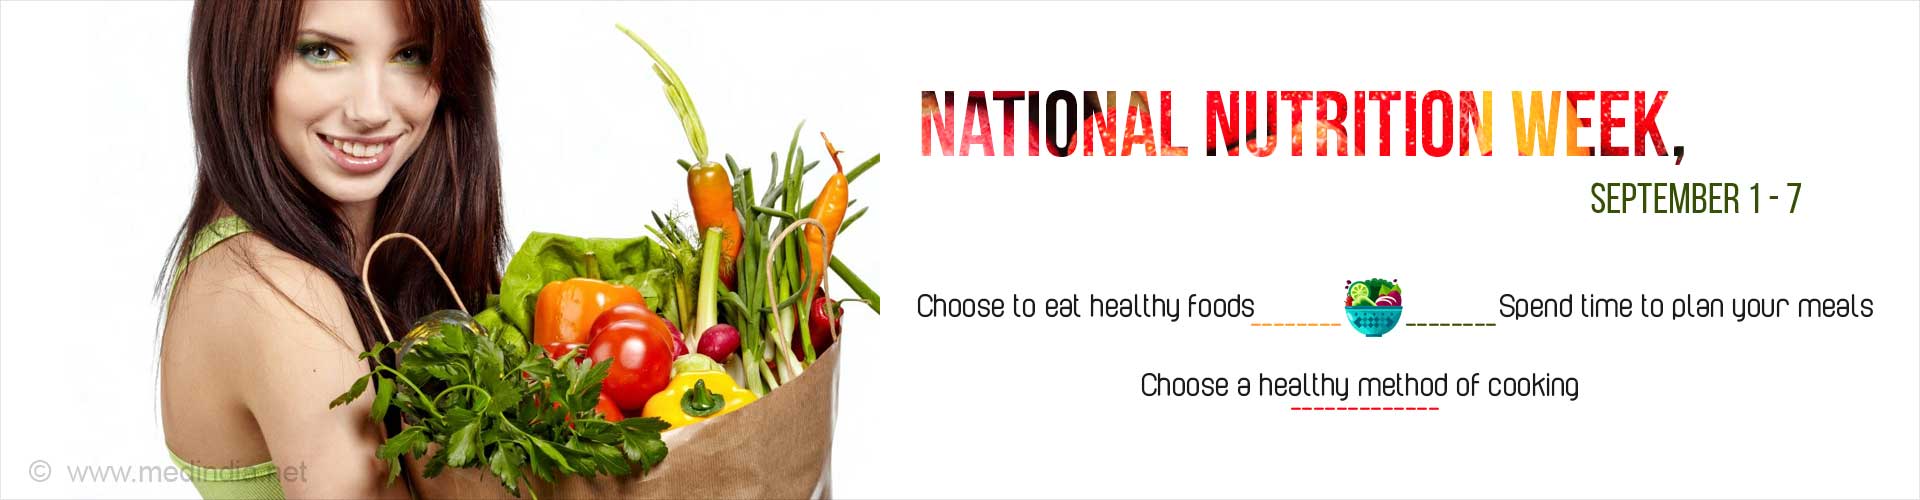 National Nutrition Week (September 1-7)
- Choose to eat healthy foods
- Spend time to plan your meals
- Choose a healthy method of cooking